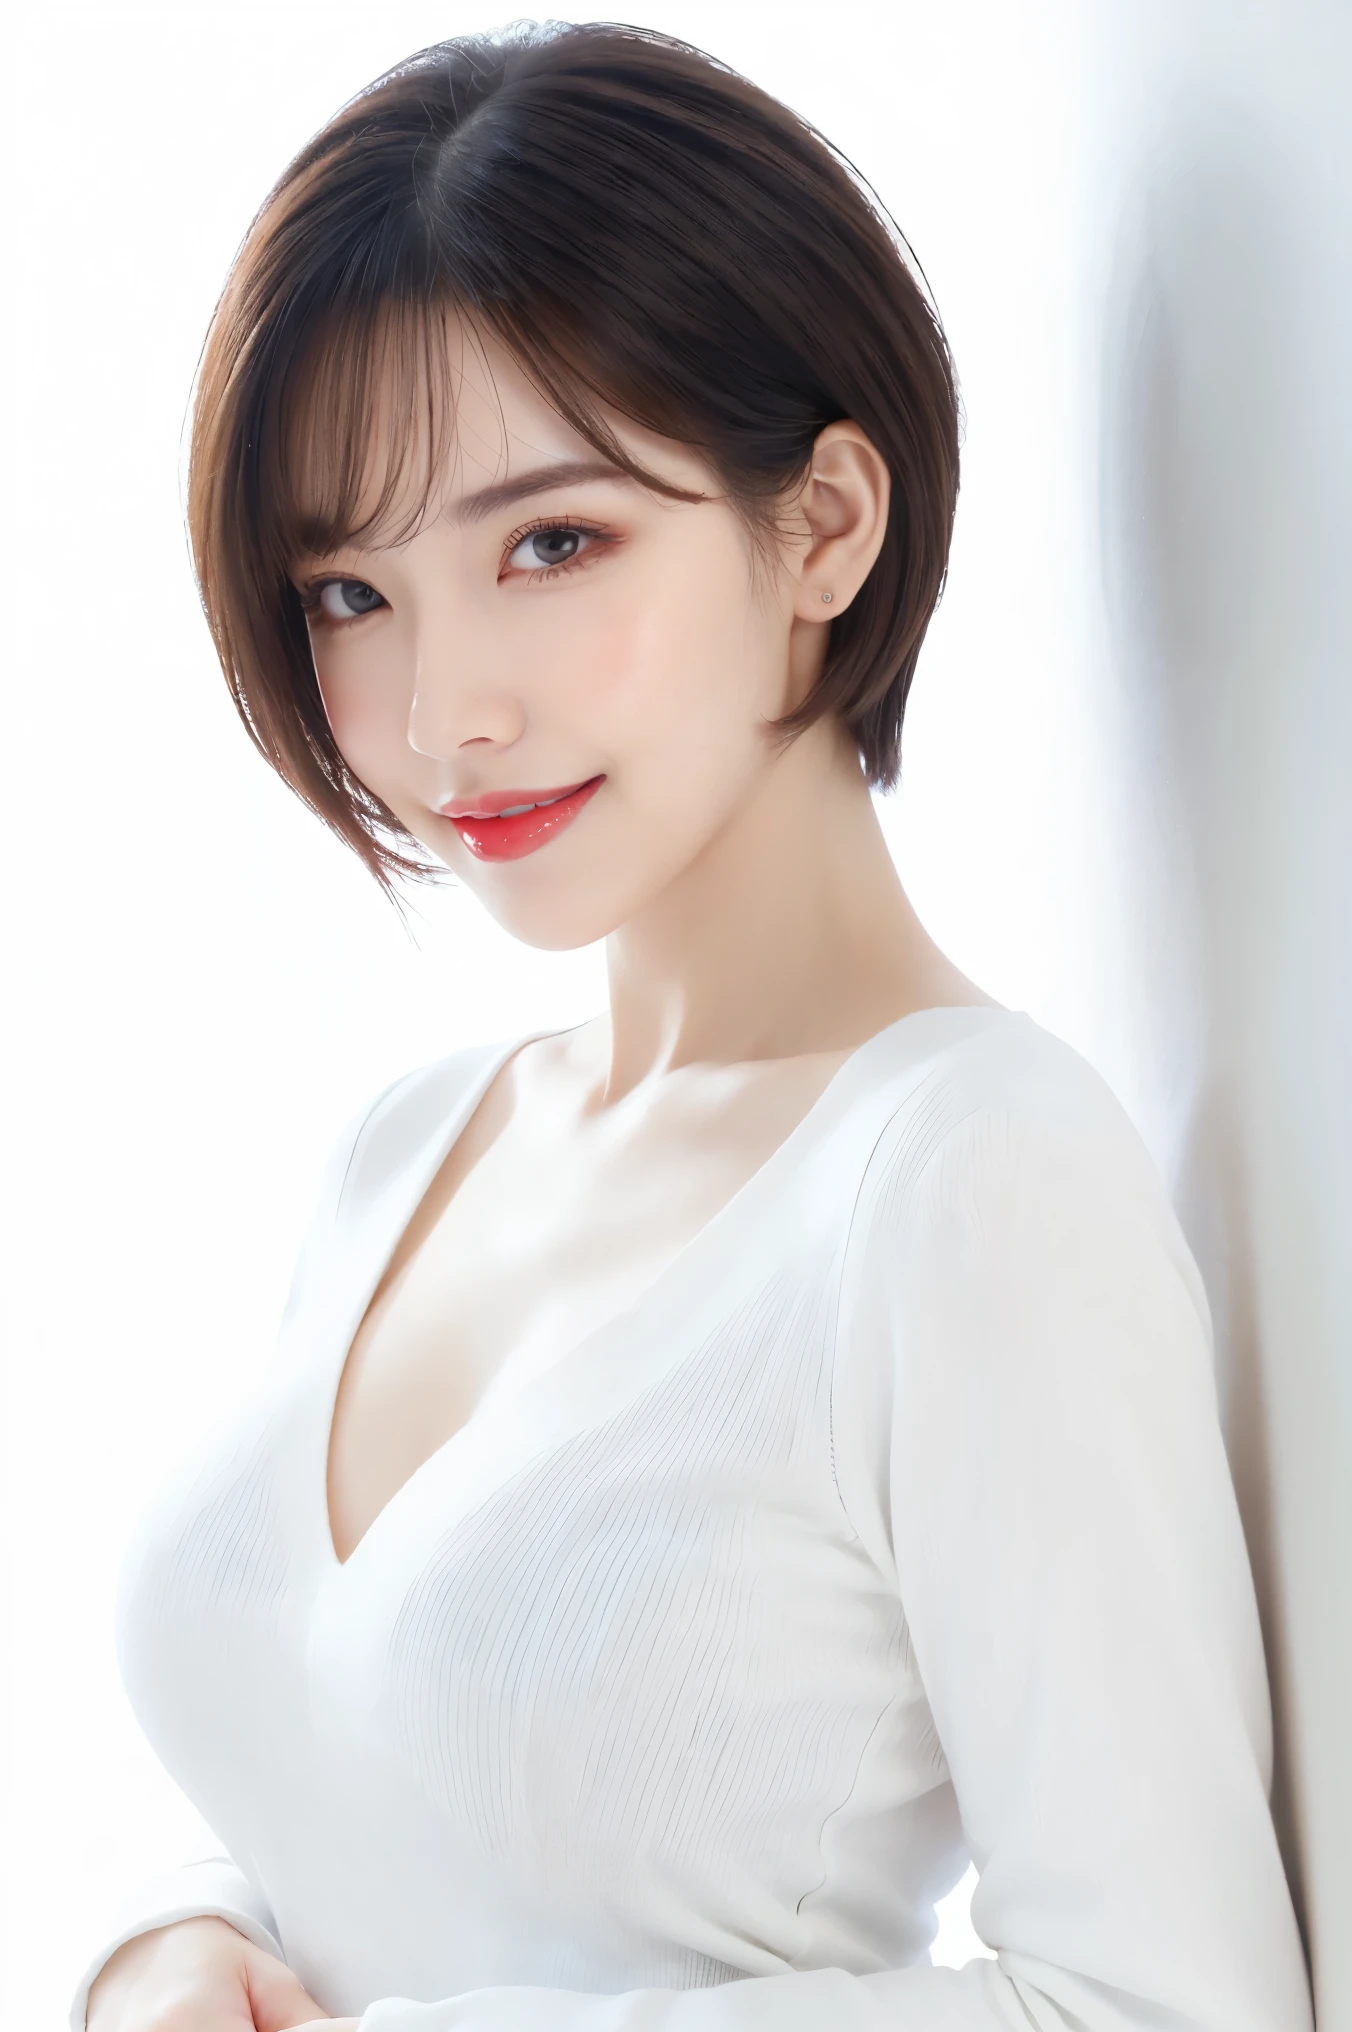 (highest quality、Tabletop、8k、Best image quality、Award-winning works)、Cute beauty、(Short Bob Hair:1.1)、(alone:1.2)、(White fitted V-neck long sleeve knit:1.2)、(Close-fitting V-neck long-sleeve knit:1.1)、(The simplest pure white background:1.6)、(Perfectly fixed in front:1.1)、Face close-up、(Very large breasts:1.3)、(Accentuate your body lines:1.2)、(Perfect female front and side portrait with proper margins:1.2)、(Perfect femininity from the side or the front:1.2)、Beautiful and exquisite、Look at me and smile、(Upright photo from the chest up:1.2)、(Turn around and look straight at me:1.2)、(Perfect Makeup:1.1)、Bright lipstick、Ultra-high definition beauty face、Ultra HD Hair、Ultra HD Shining Eyes、Ultra High Resolution Perfect Teeth、Super high quality glossy lip、Accurate anatomy、Very beautiful skin、(Pure white skin shining in ultra-high resolution:1.2)、An elegant upright posture when viewed from the front、(Very bright:1.3)